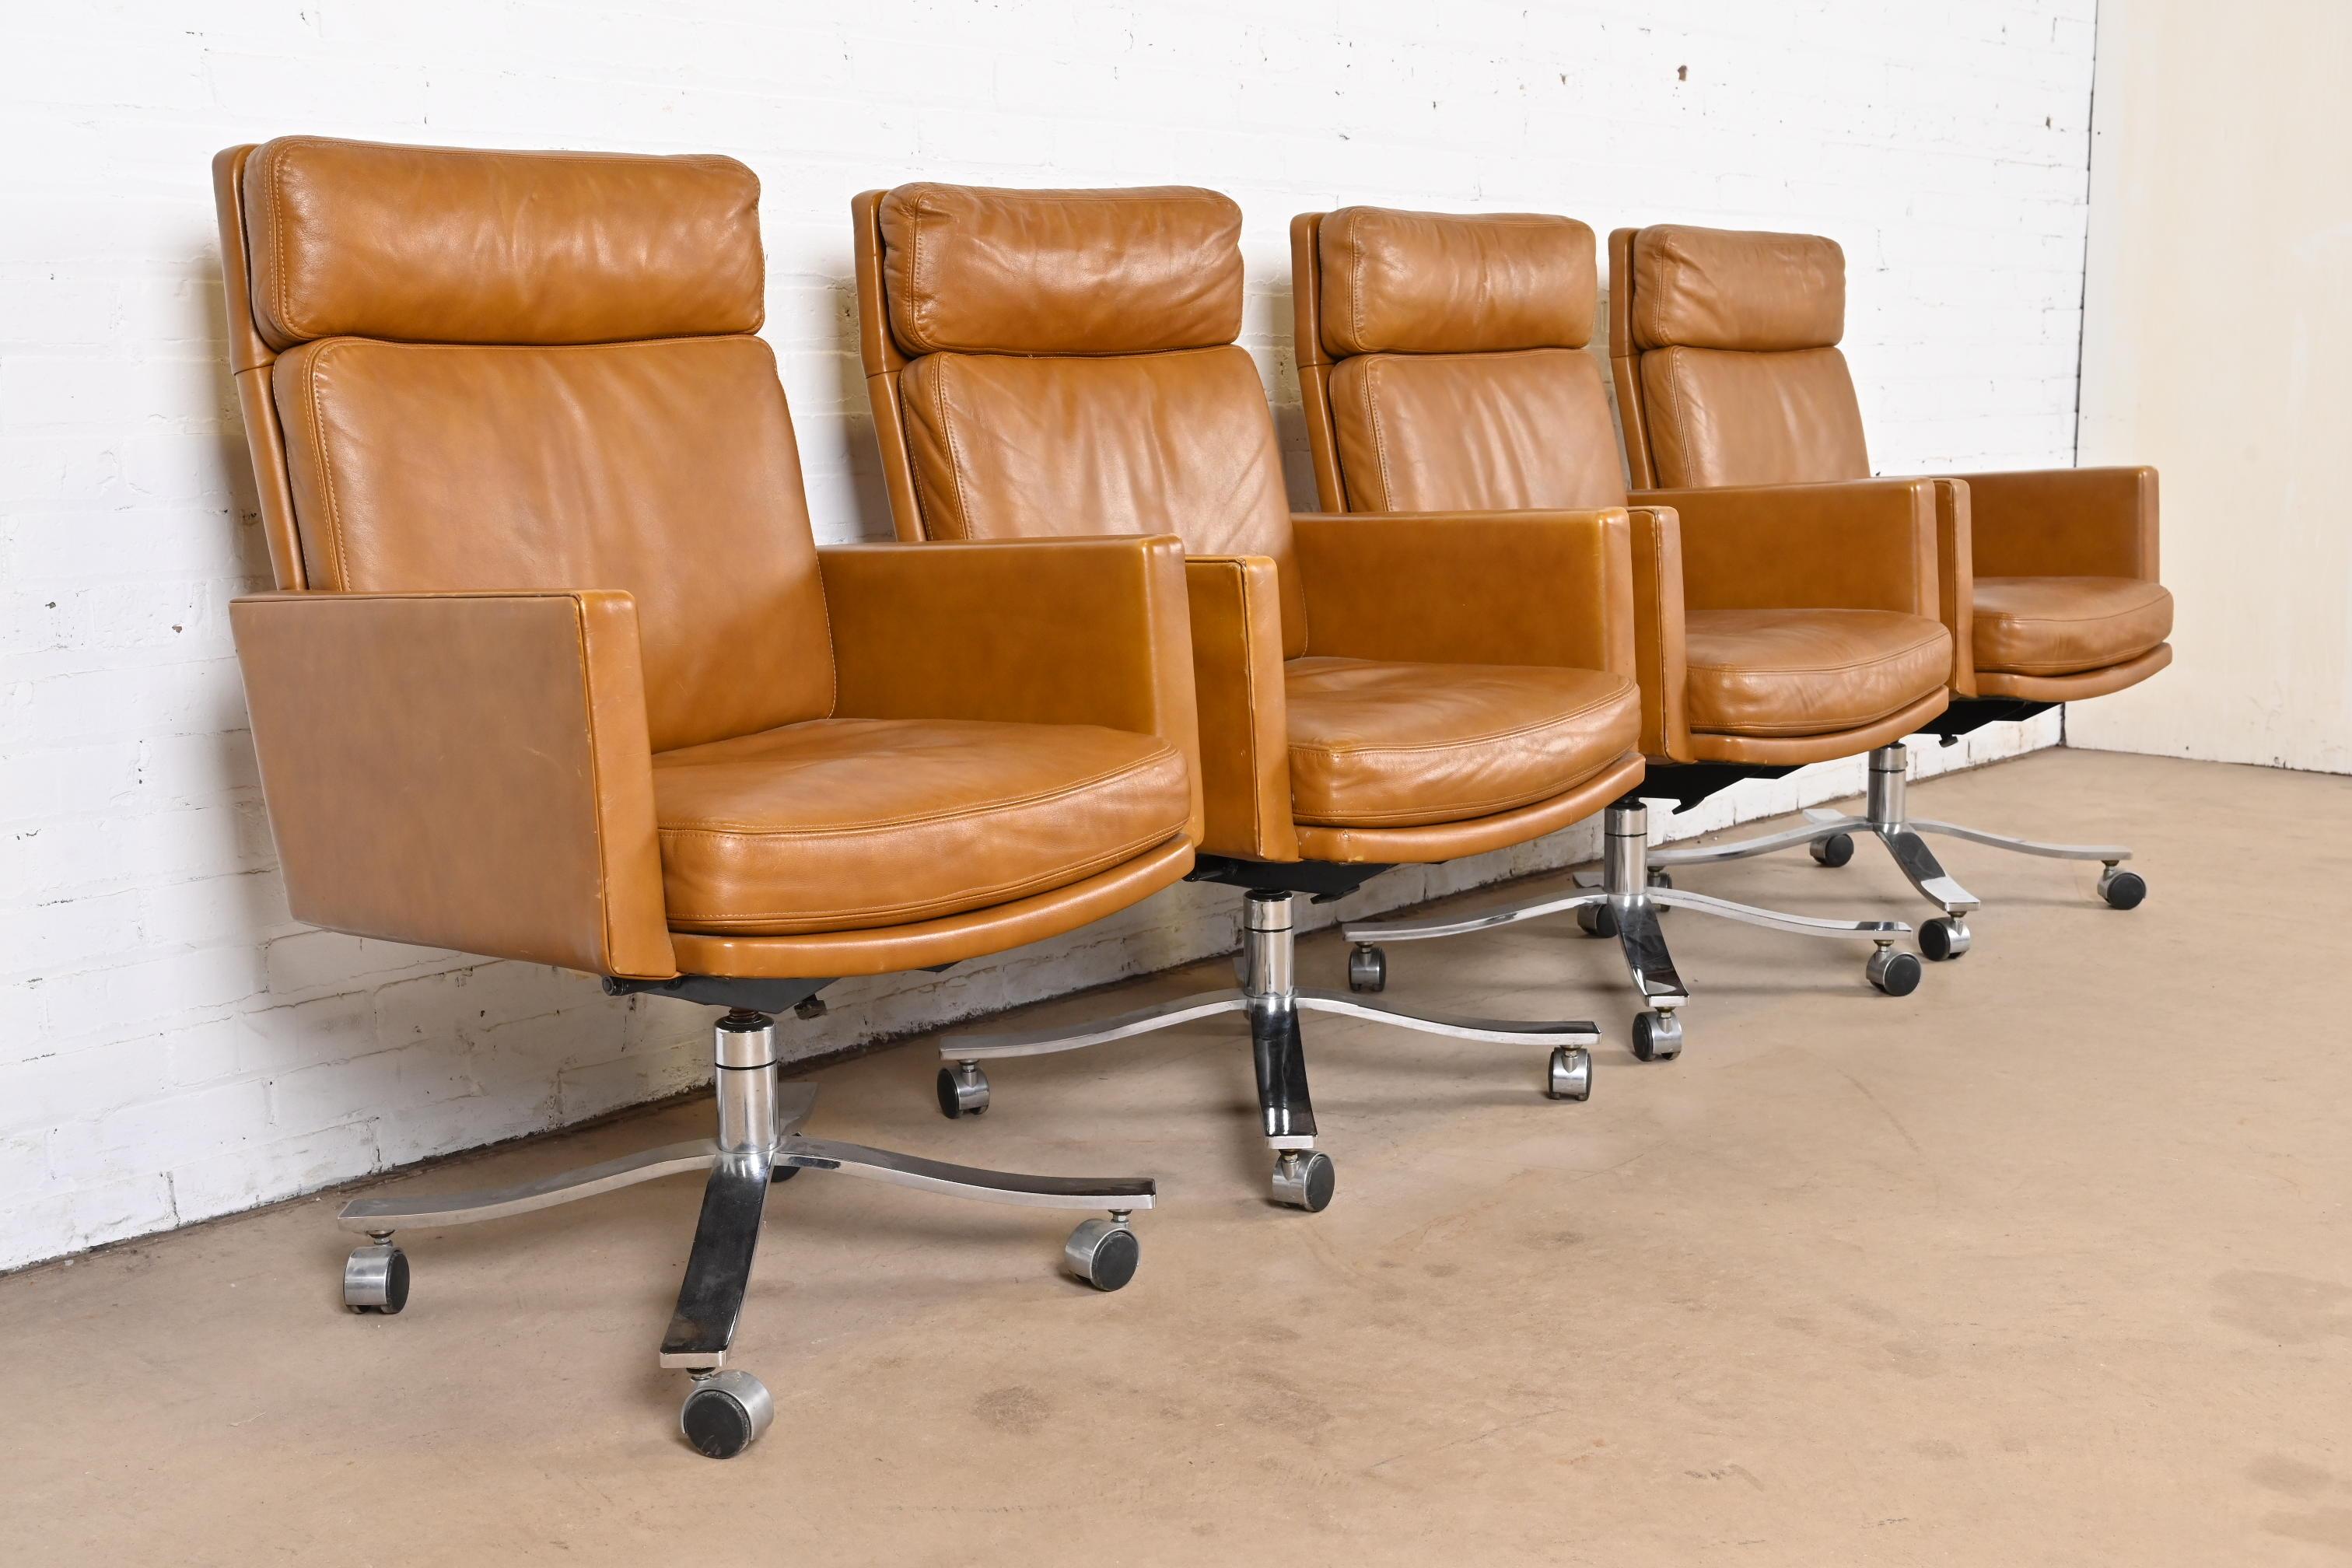 Stow Davis Mid-Century Modern Leather Executive Swivel Desk Chairs, Set of Four In Good Condition For Sale In South Bend, IN